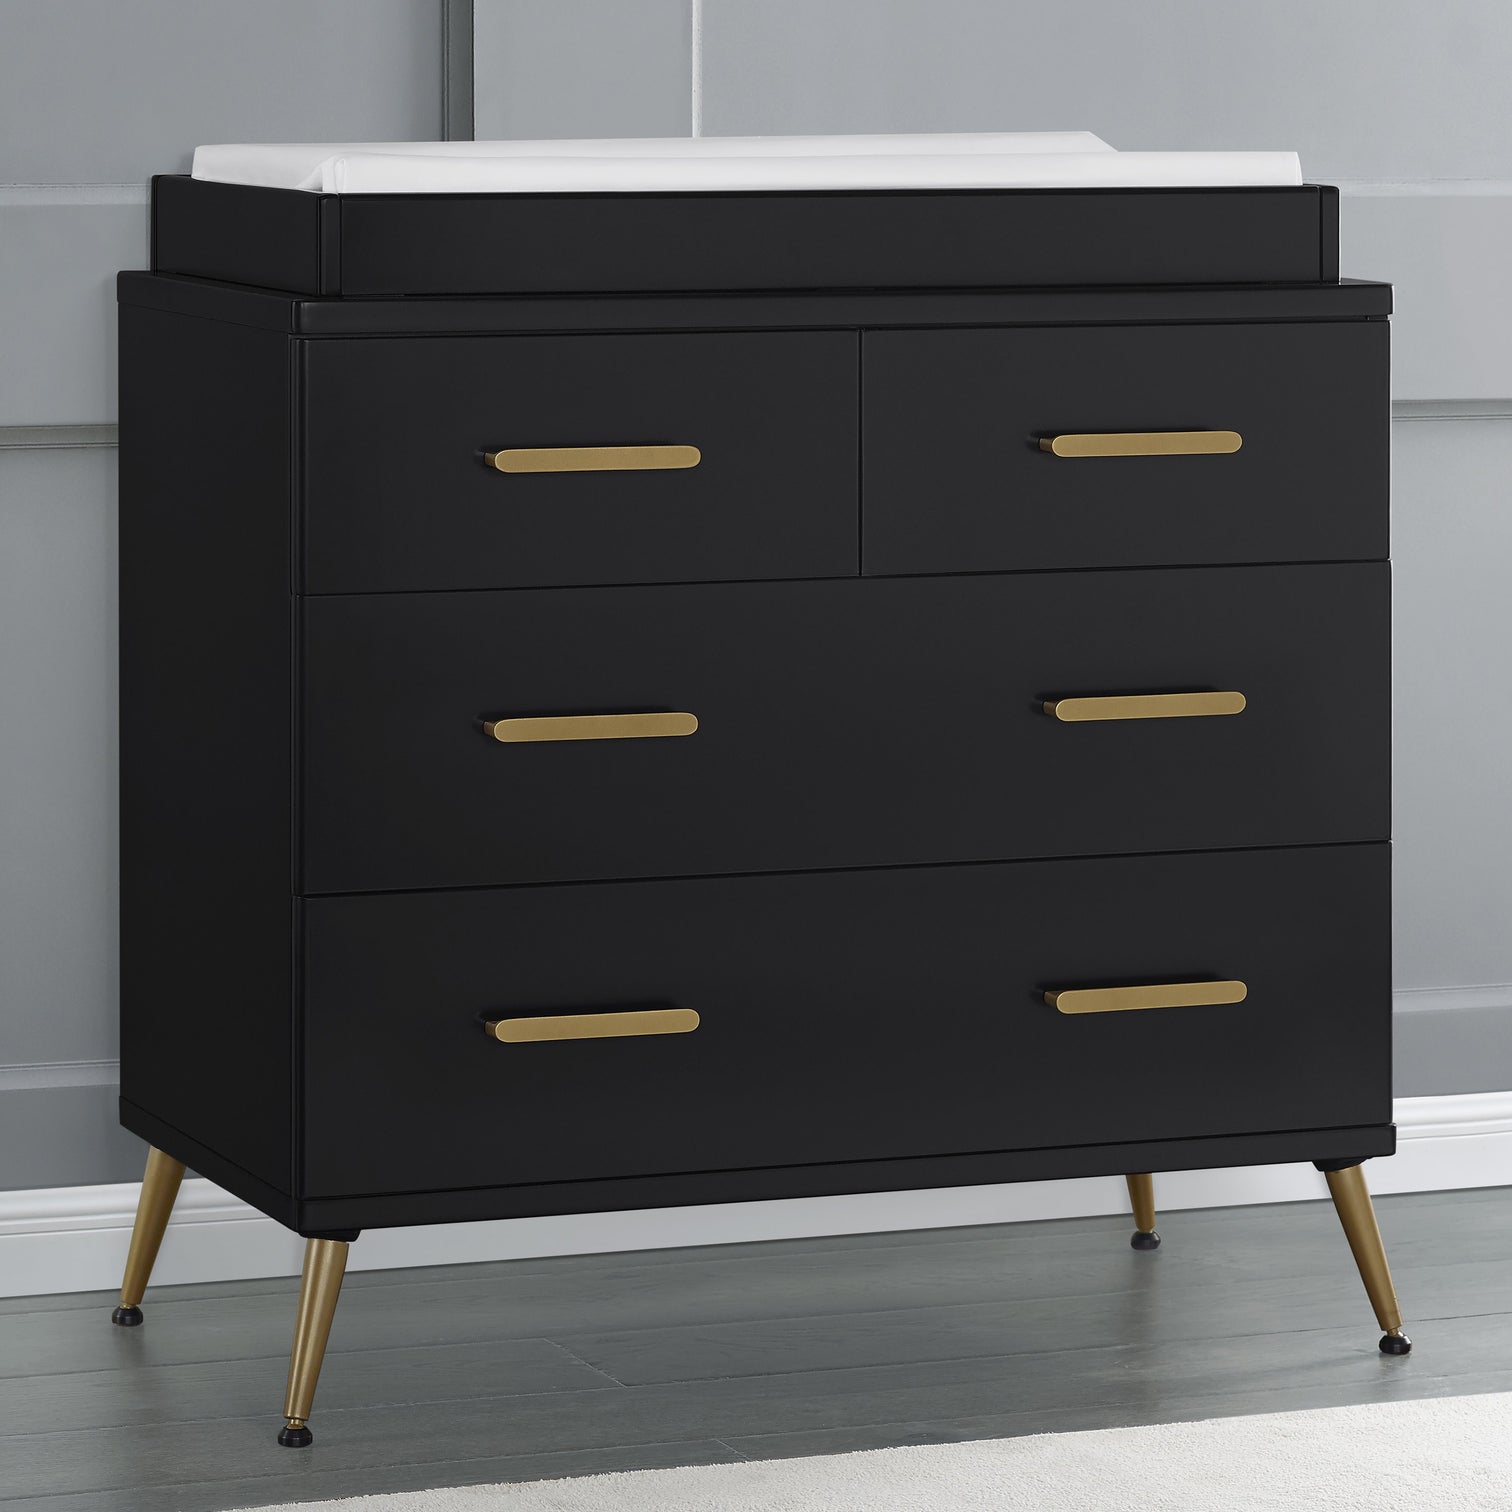 Sloane 4 Drawer Dresser with Changing Top - Black - Twinkle Twinkle Little One